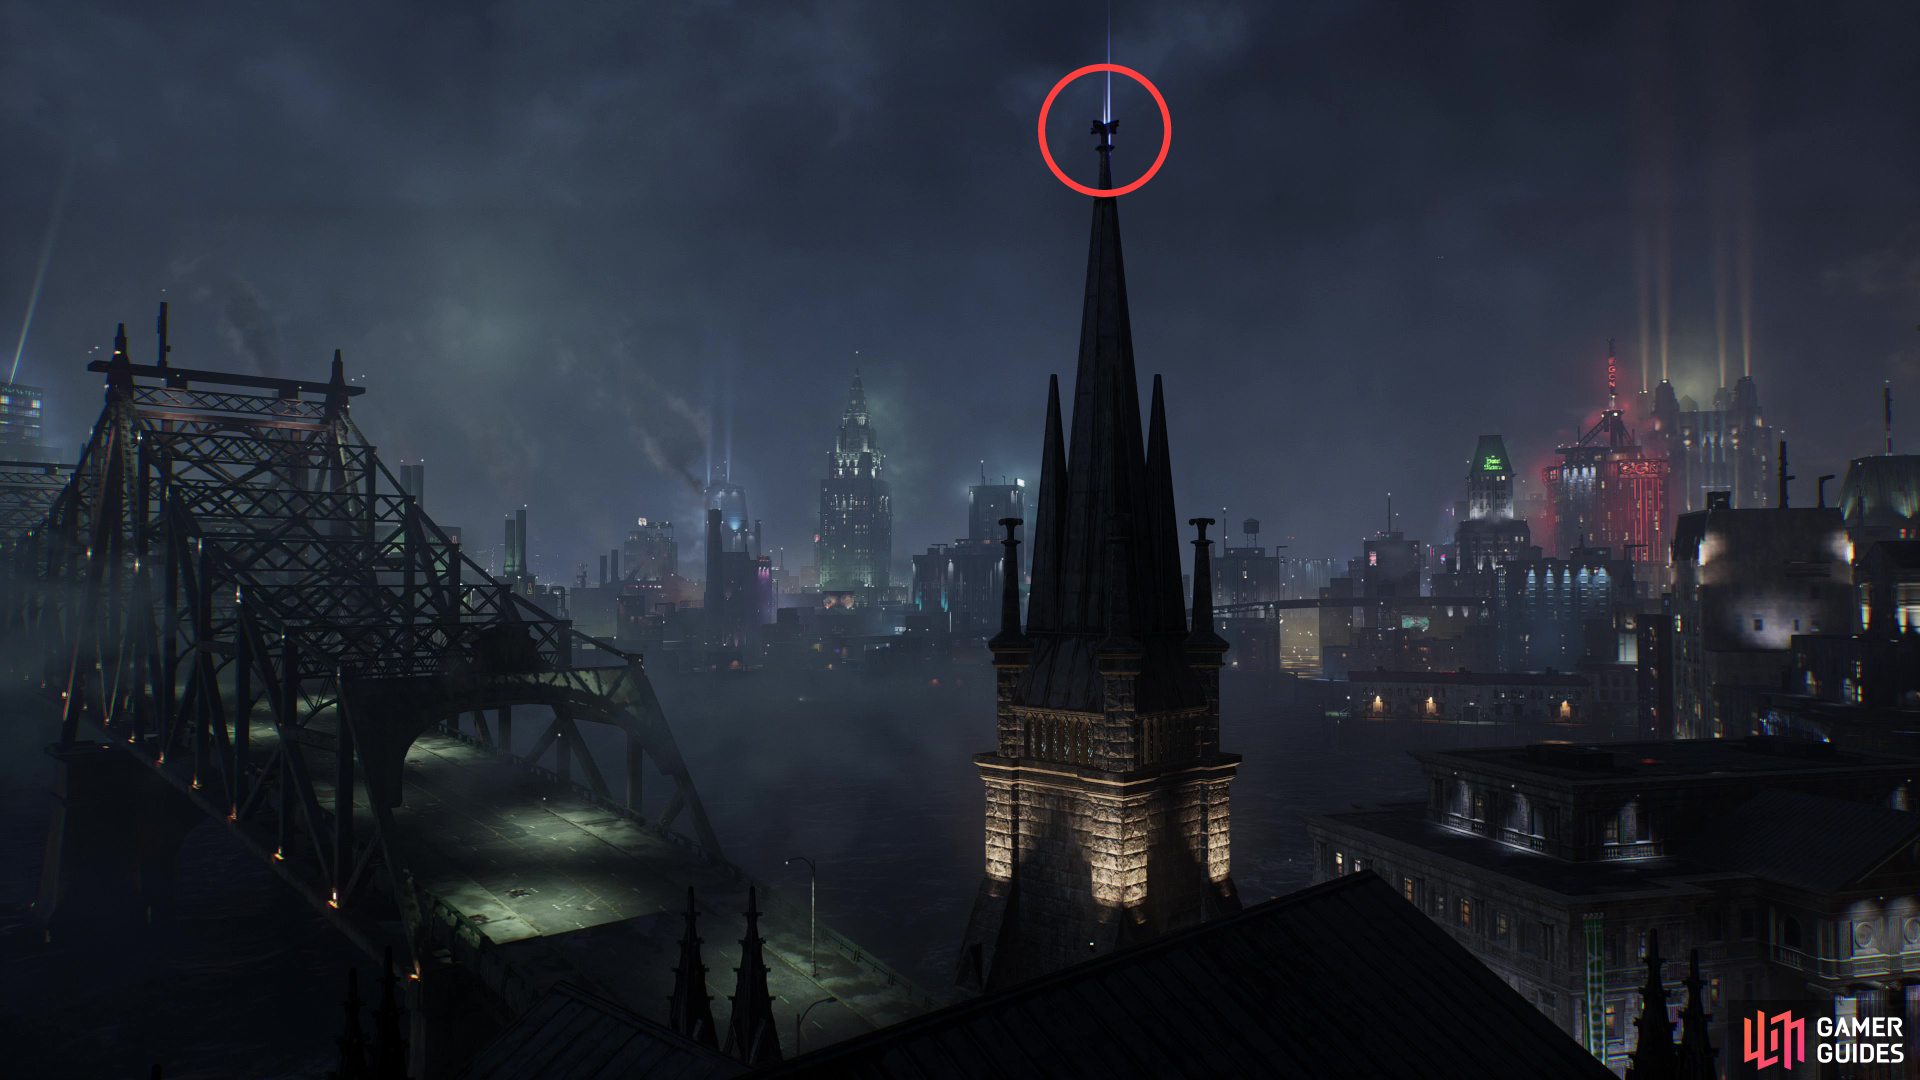 The spire of the Bay Street Church hides another Batarang.